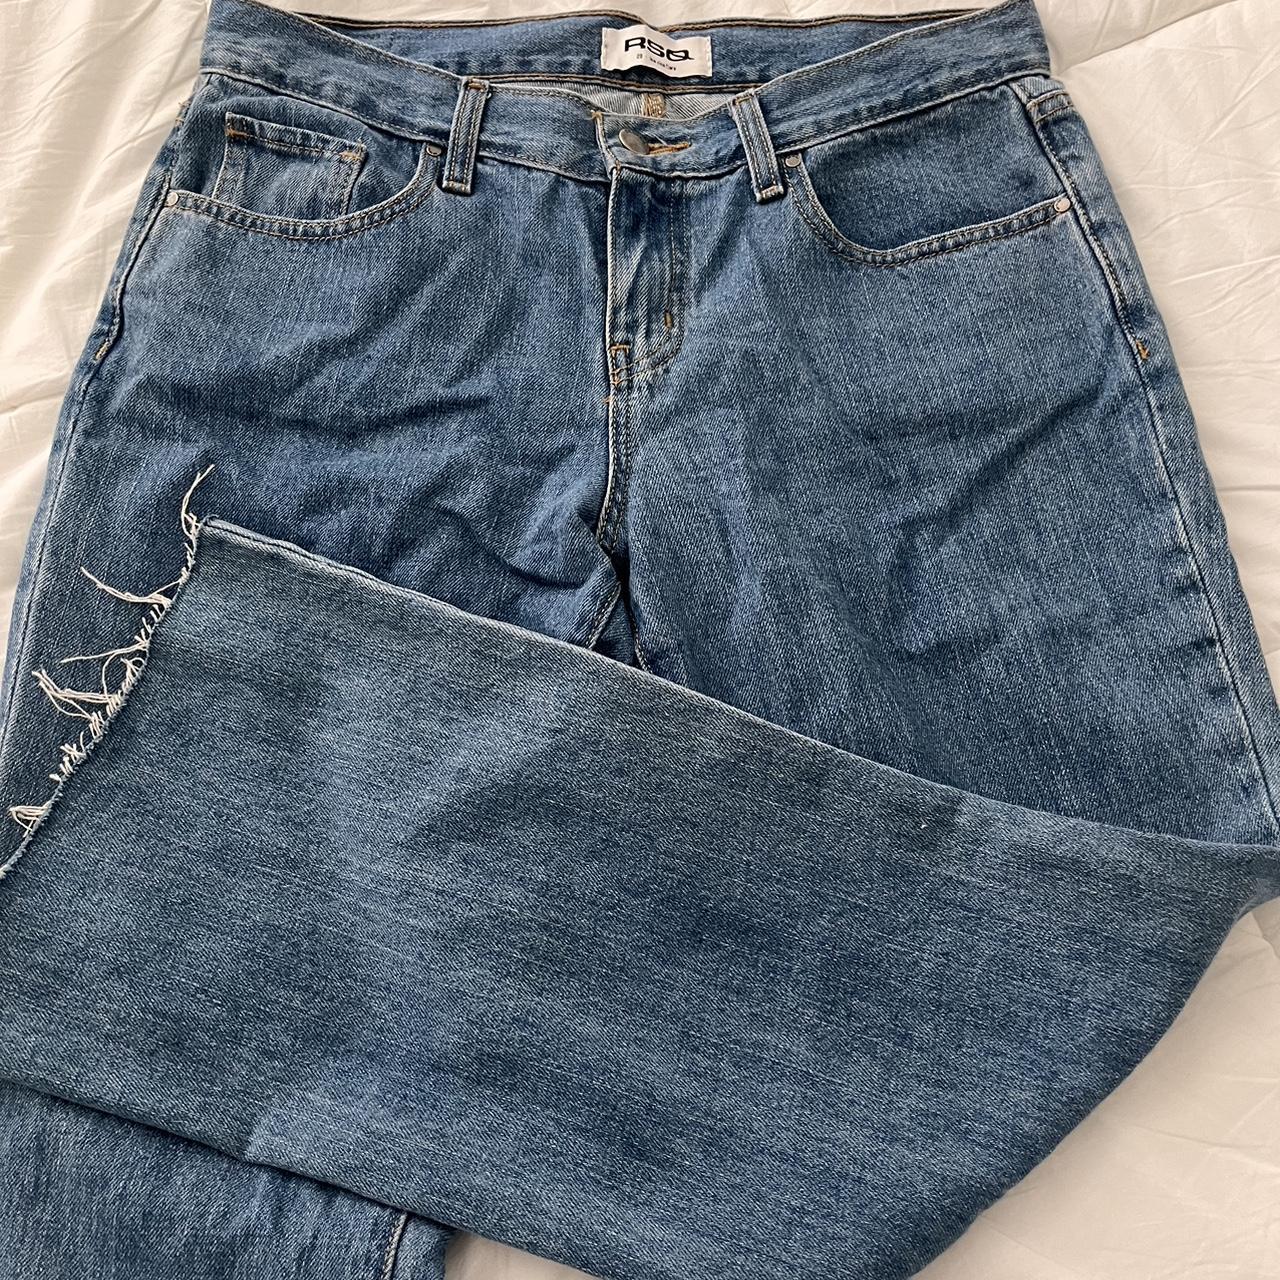 rsq/tilly’s low rise flare •i am 4’11 and cut these... - Depop